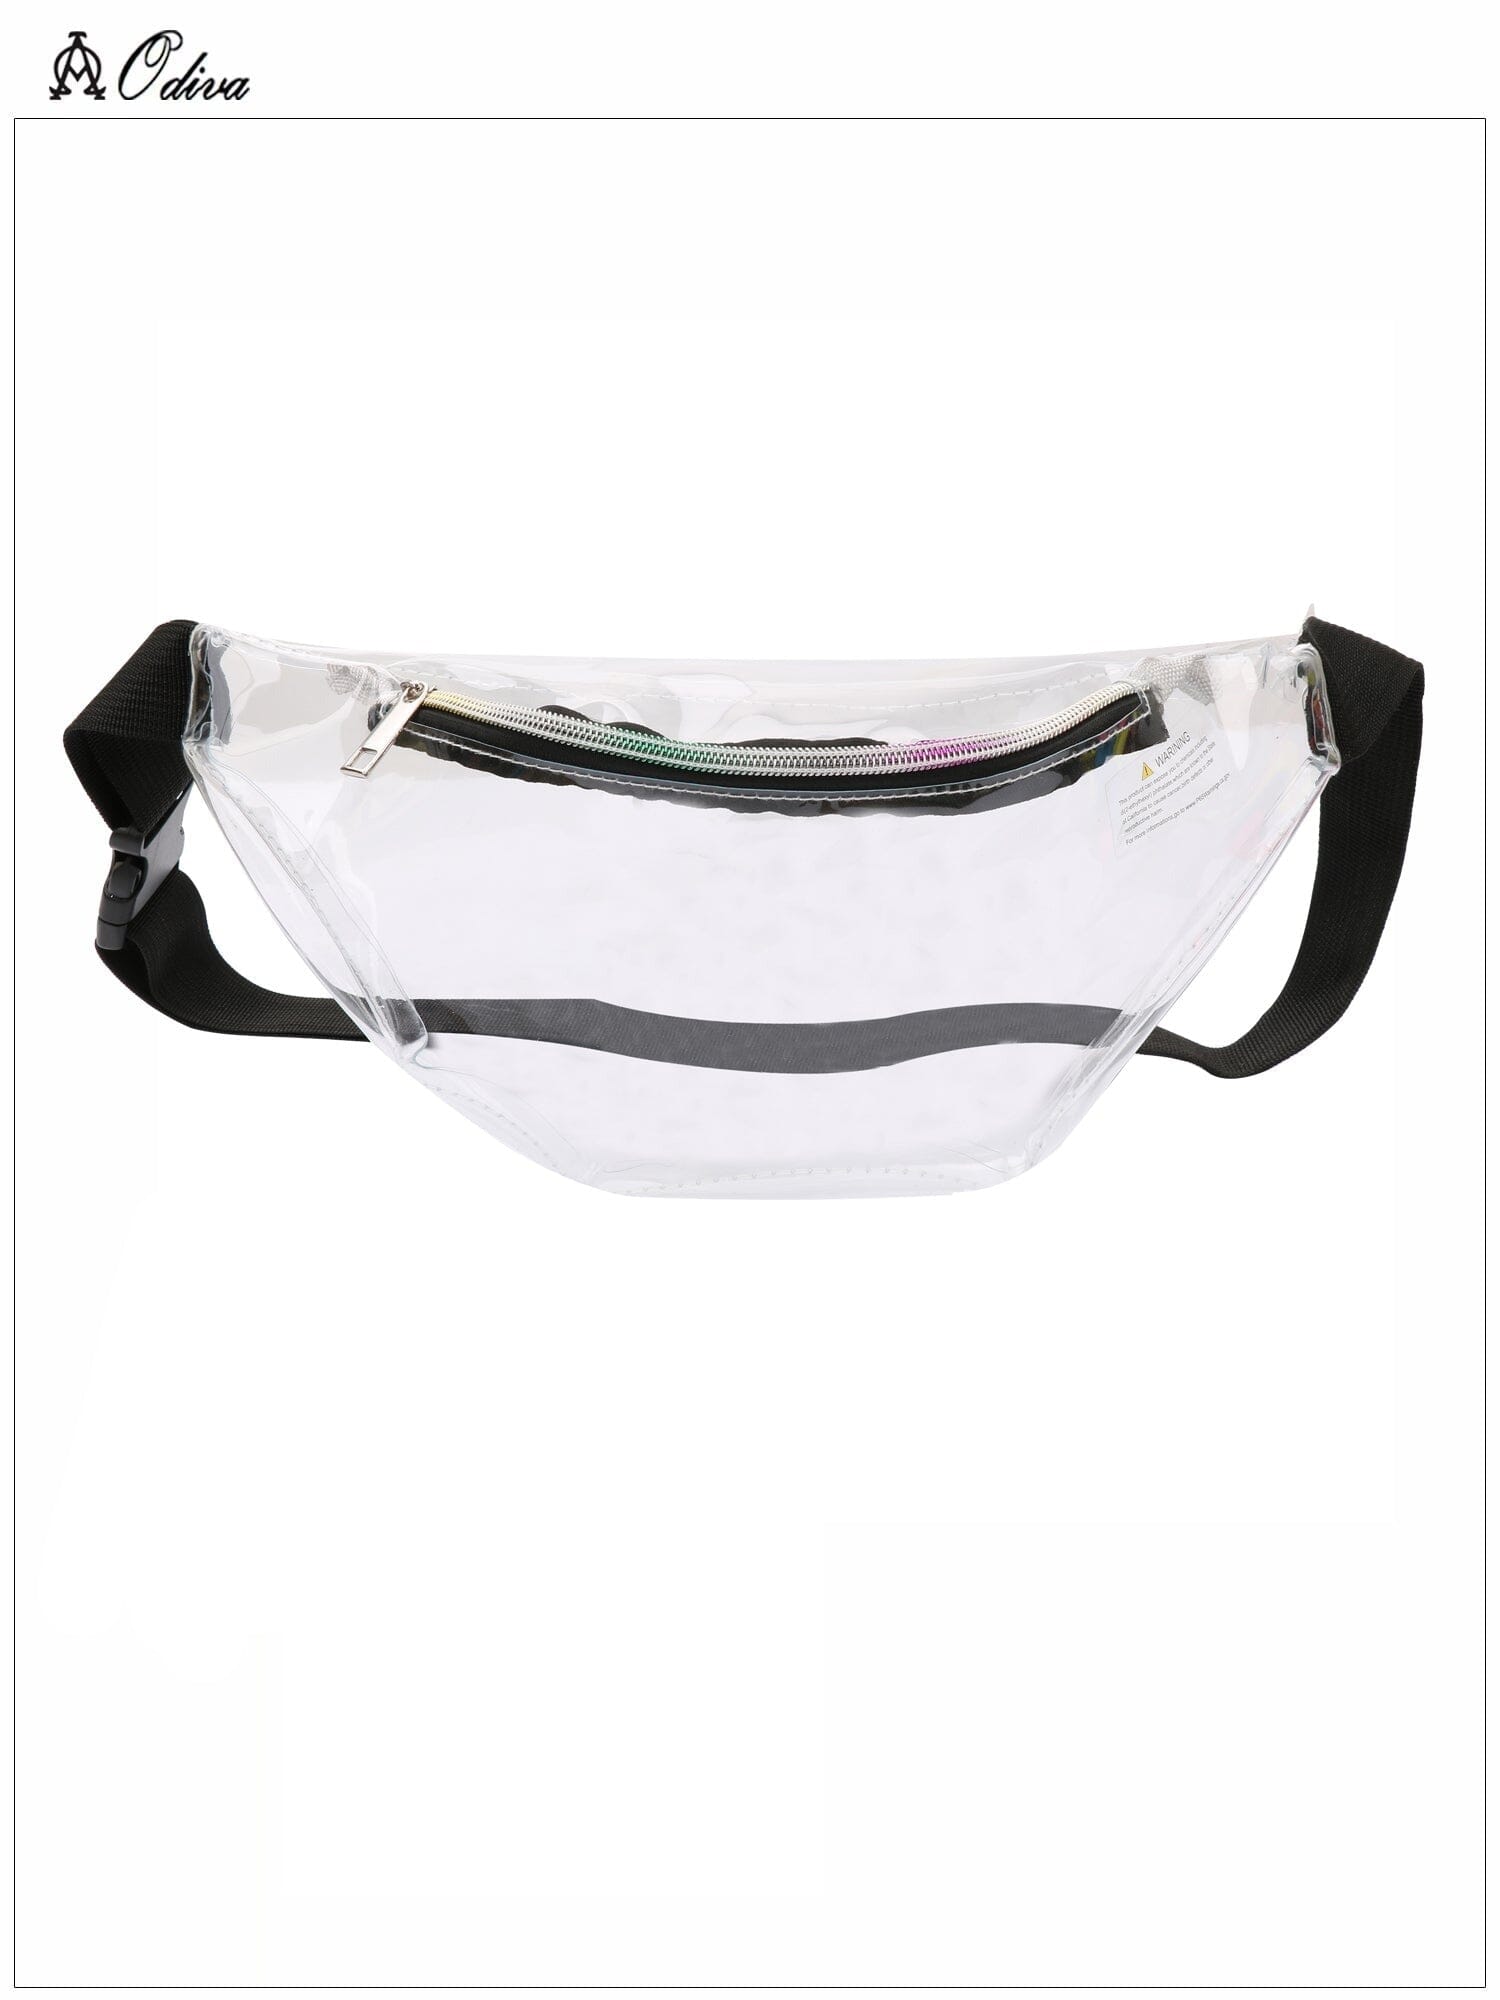 WHOLESALE-CLEAR-FANNY-PACK-AO869